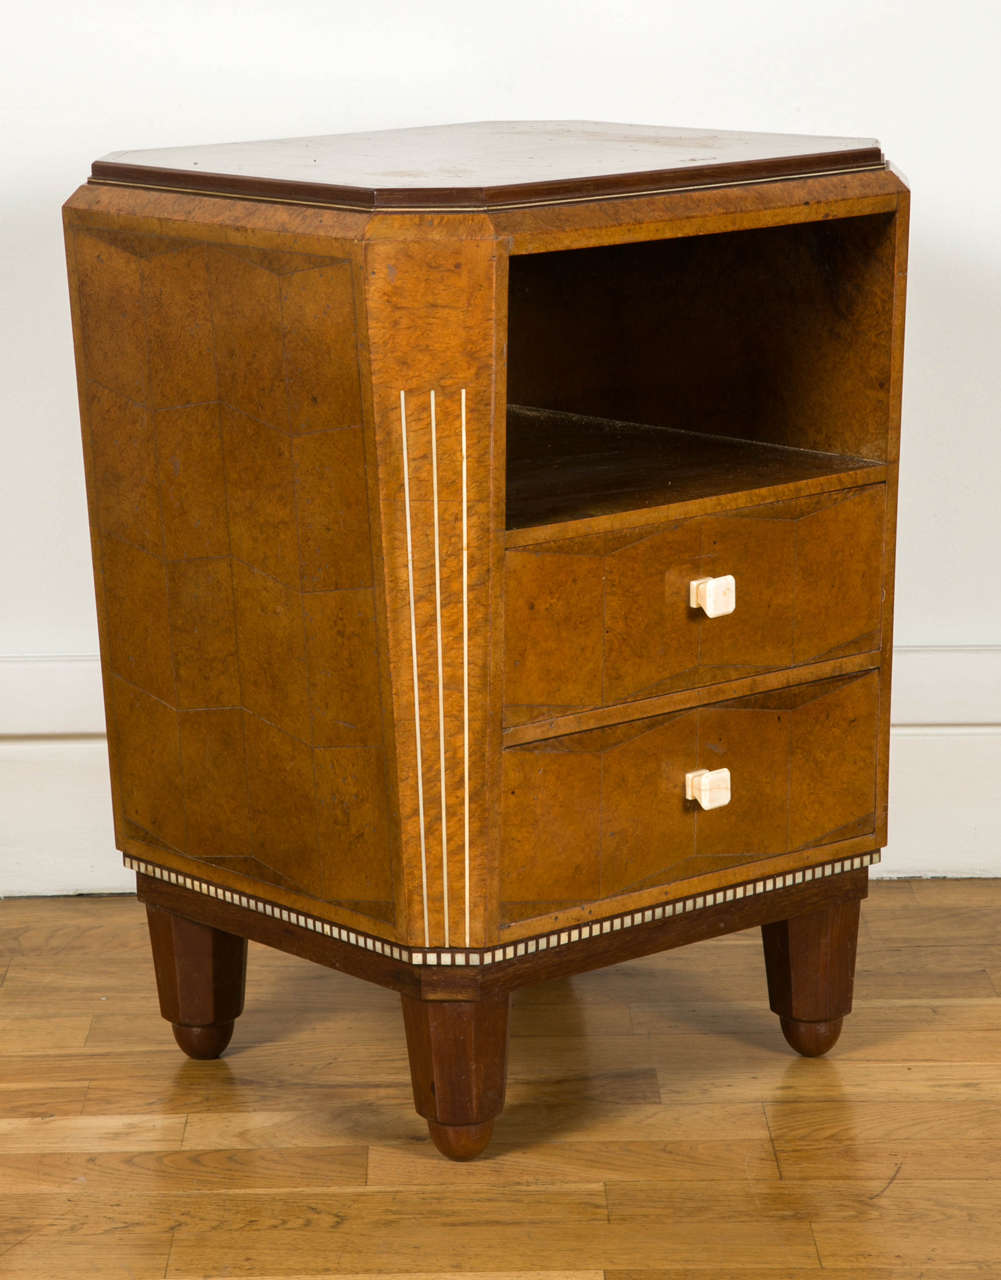 Marquetry Rare Pair of Nightstands by Paul Follot, circa 1926-1927